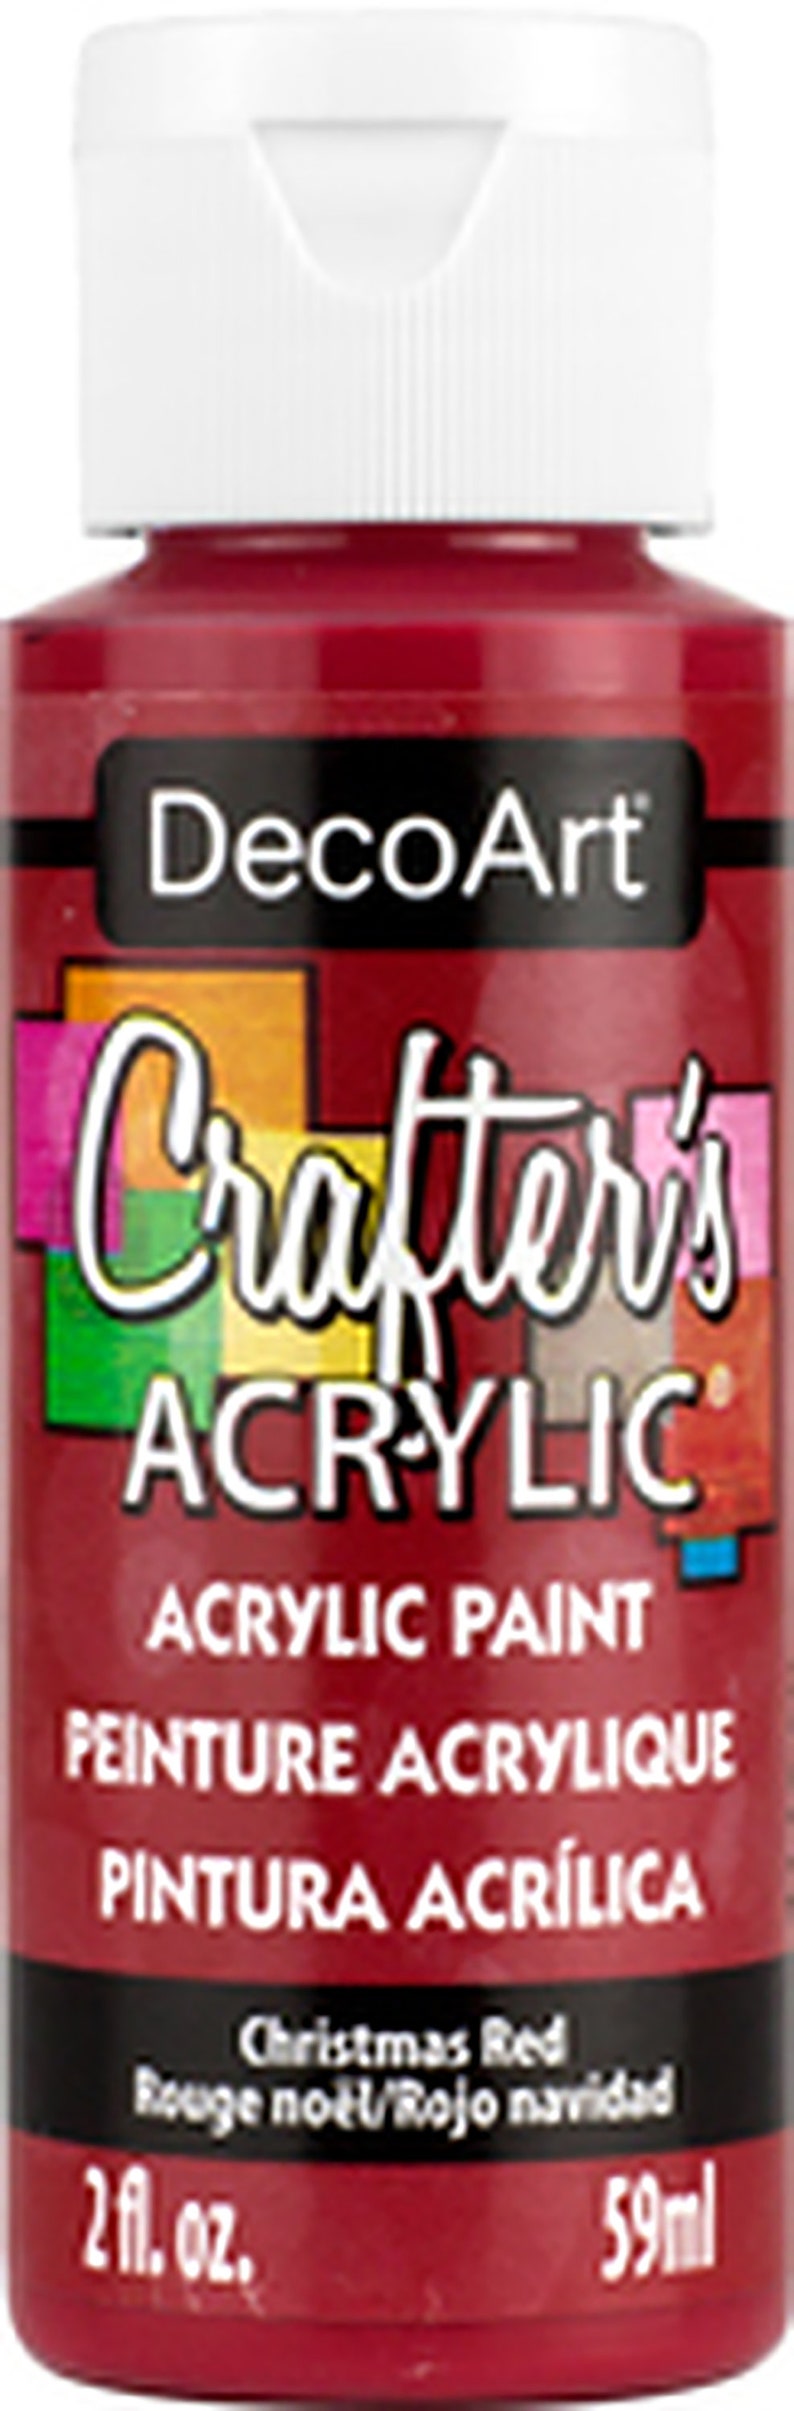 DecoArt Crafters Acrylic Paints Red Tones 59ml 2oz bottles Craft Paints Christmas Red DCA20